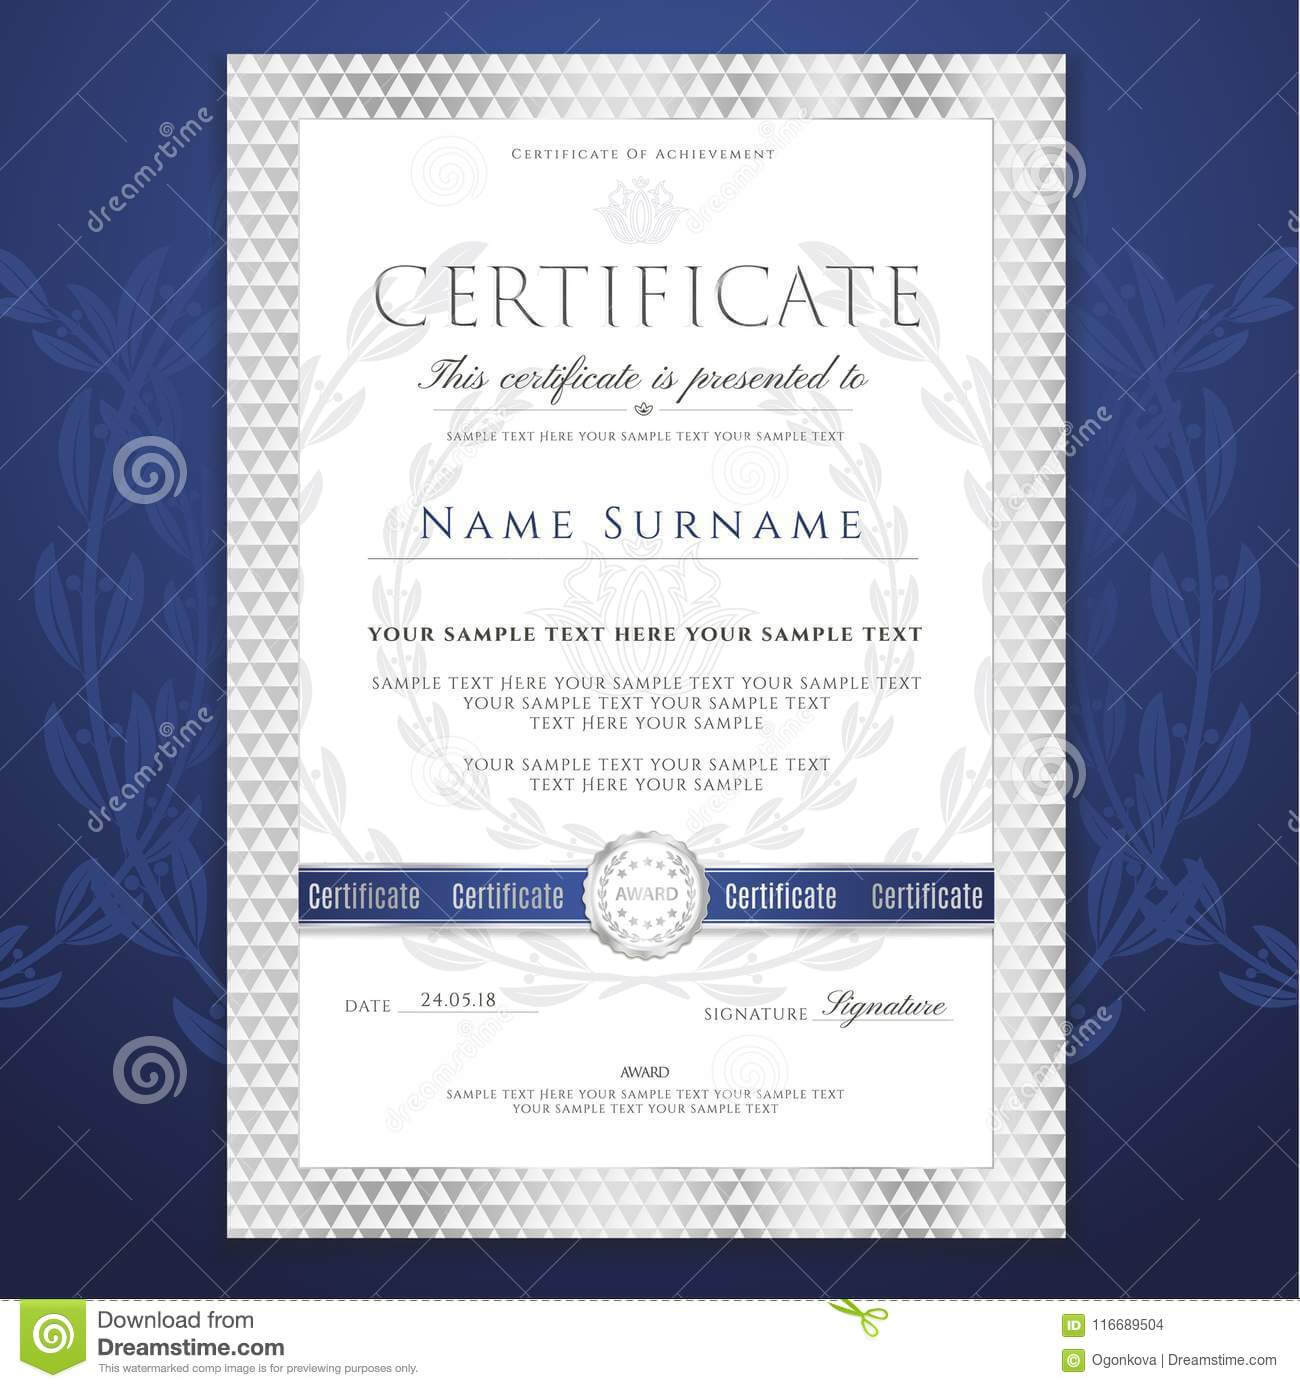 Certificate Template. Printable / Editable Design For Intended For Certificate Of Completion Template Free Printable